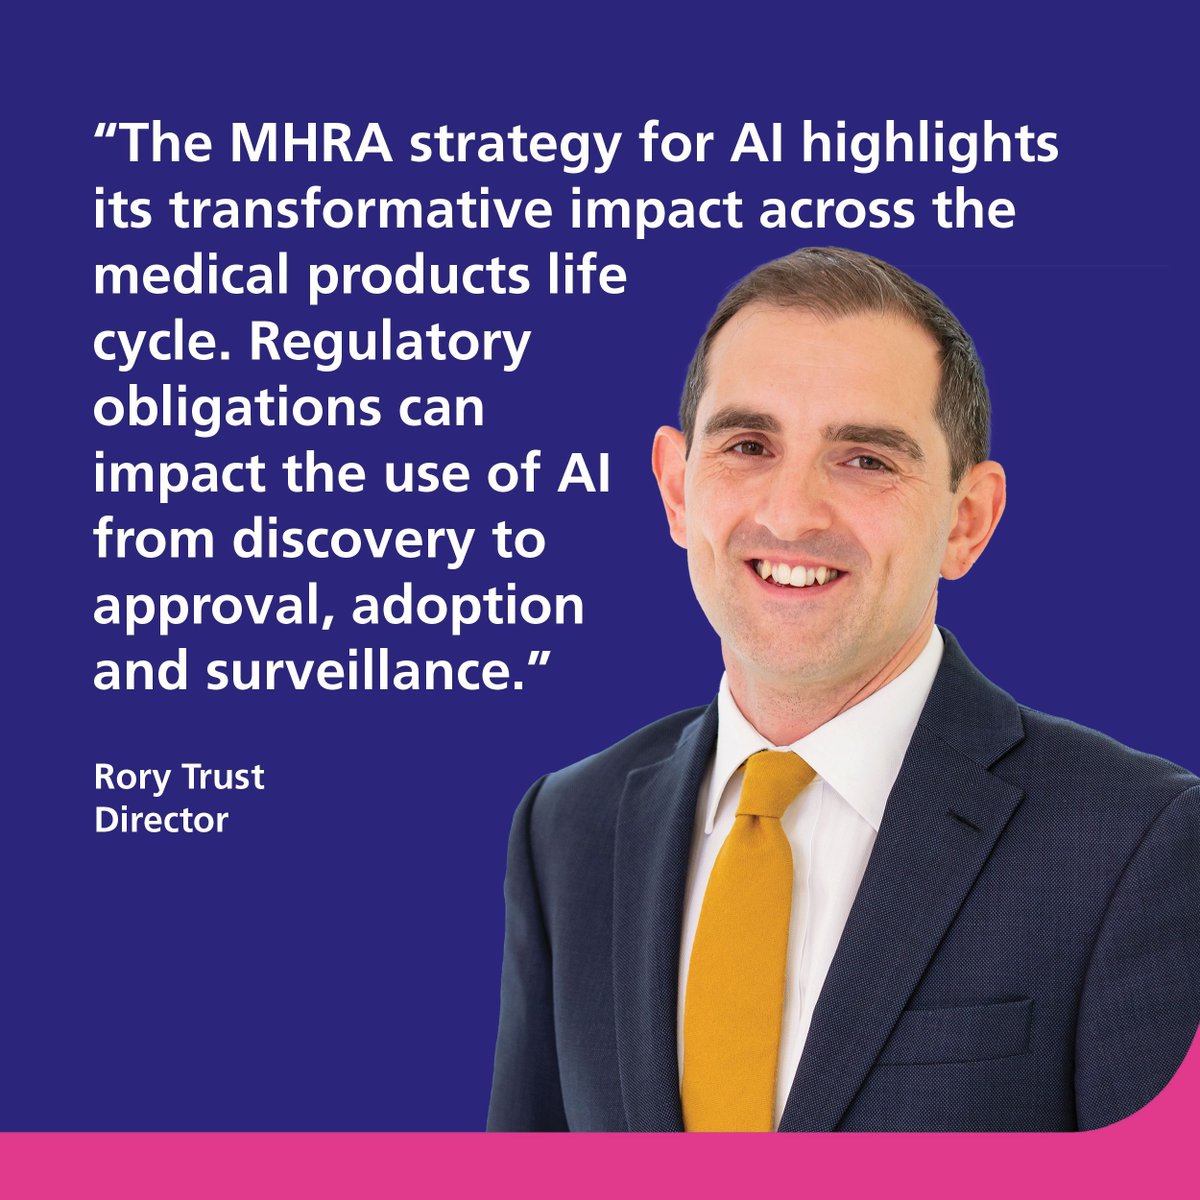 In the latest update in our Health Tech series, Rory Trust considers the MHRA’s recently published #AI strategy and how this will impact the Healthcare and Life Sciences sectors. Read our latest article: buff.ly/4dK1YP7 #Healthcare #HealthTech #ArtificialIntelligence